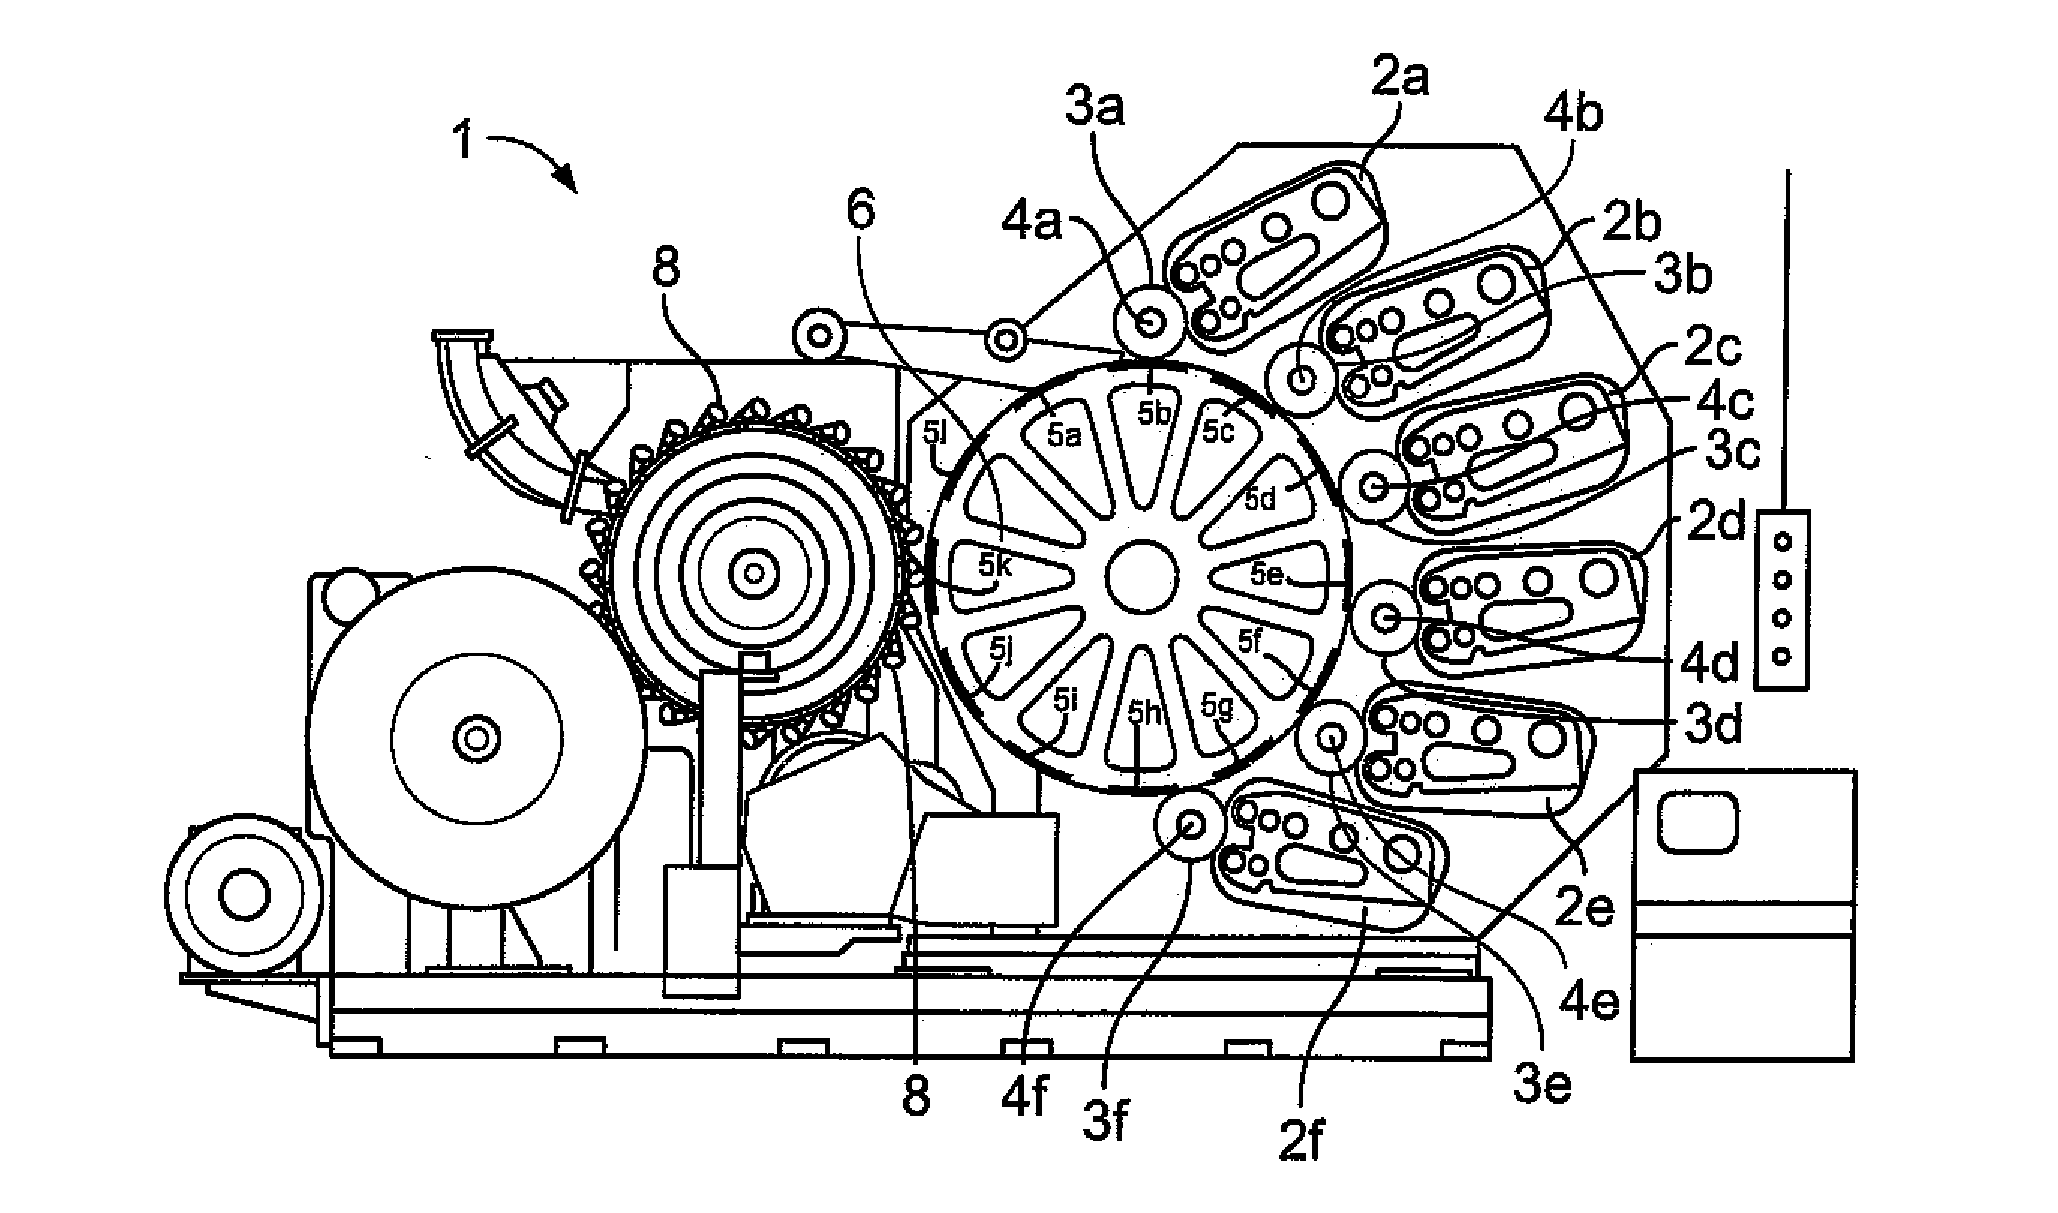 Device for Printing Cans, A Process for Printing Cans, A Printed Can and A Transfer Blanket